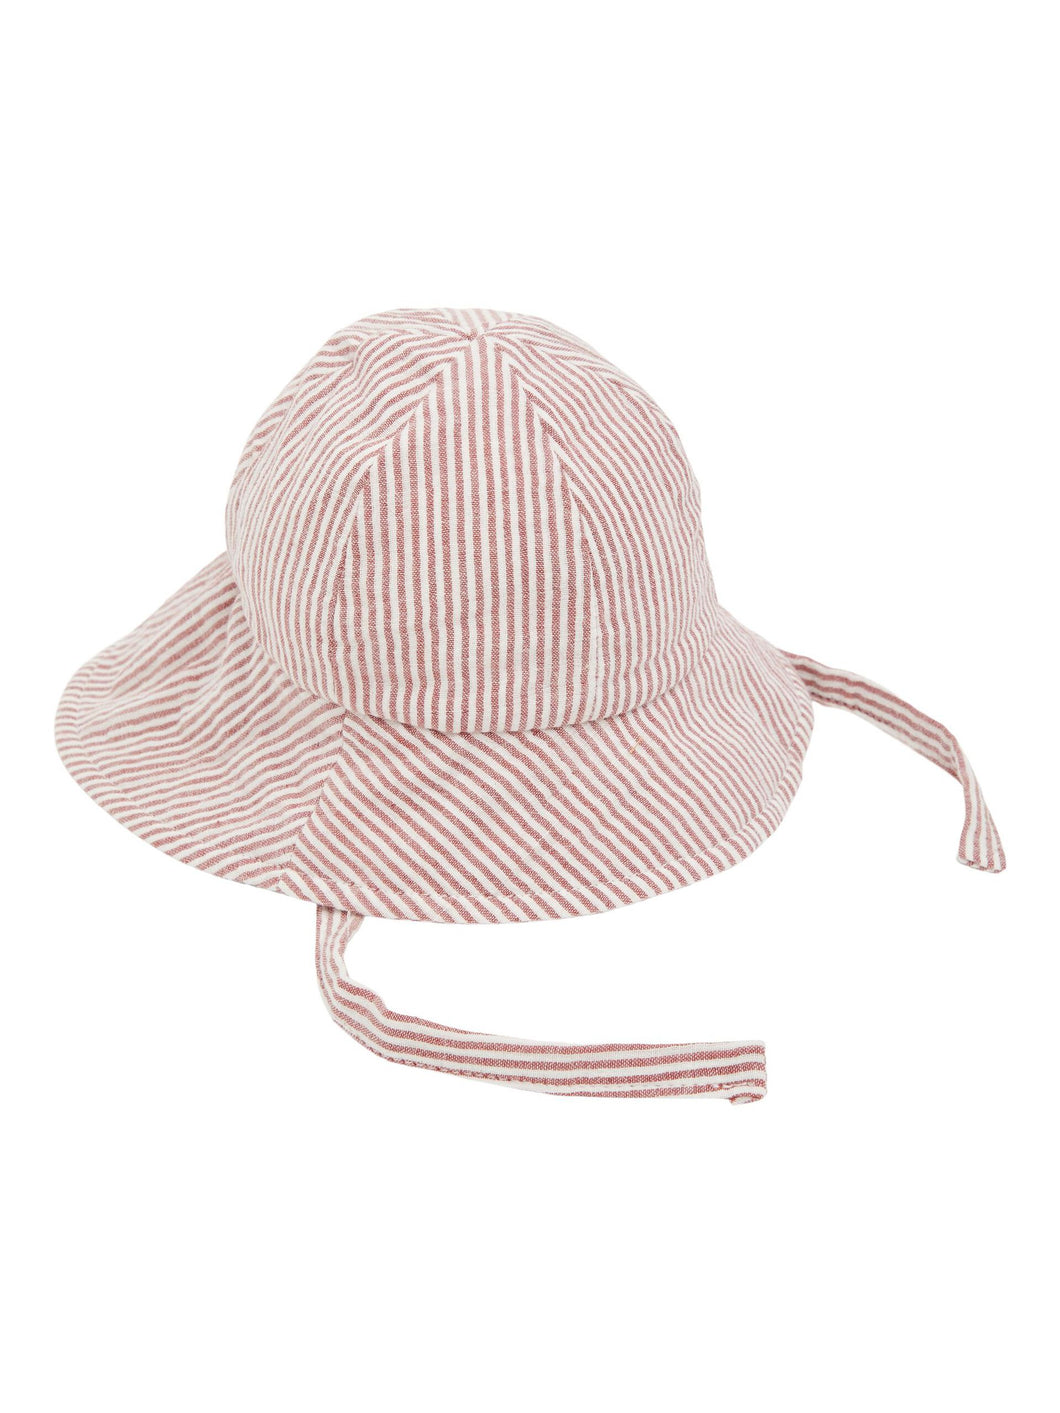 Sunhat with Earflaps Stripes, 2 colors